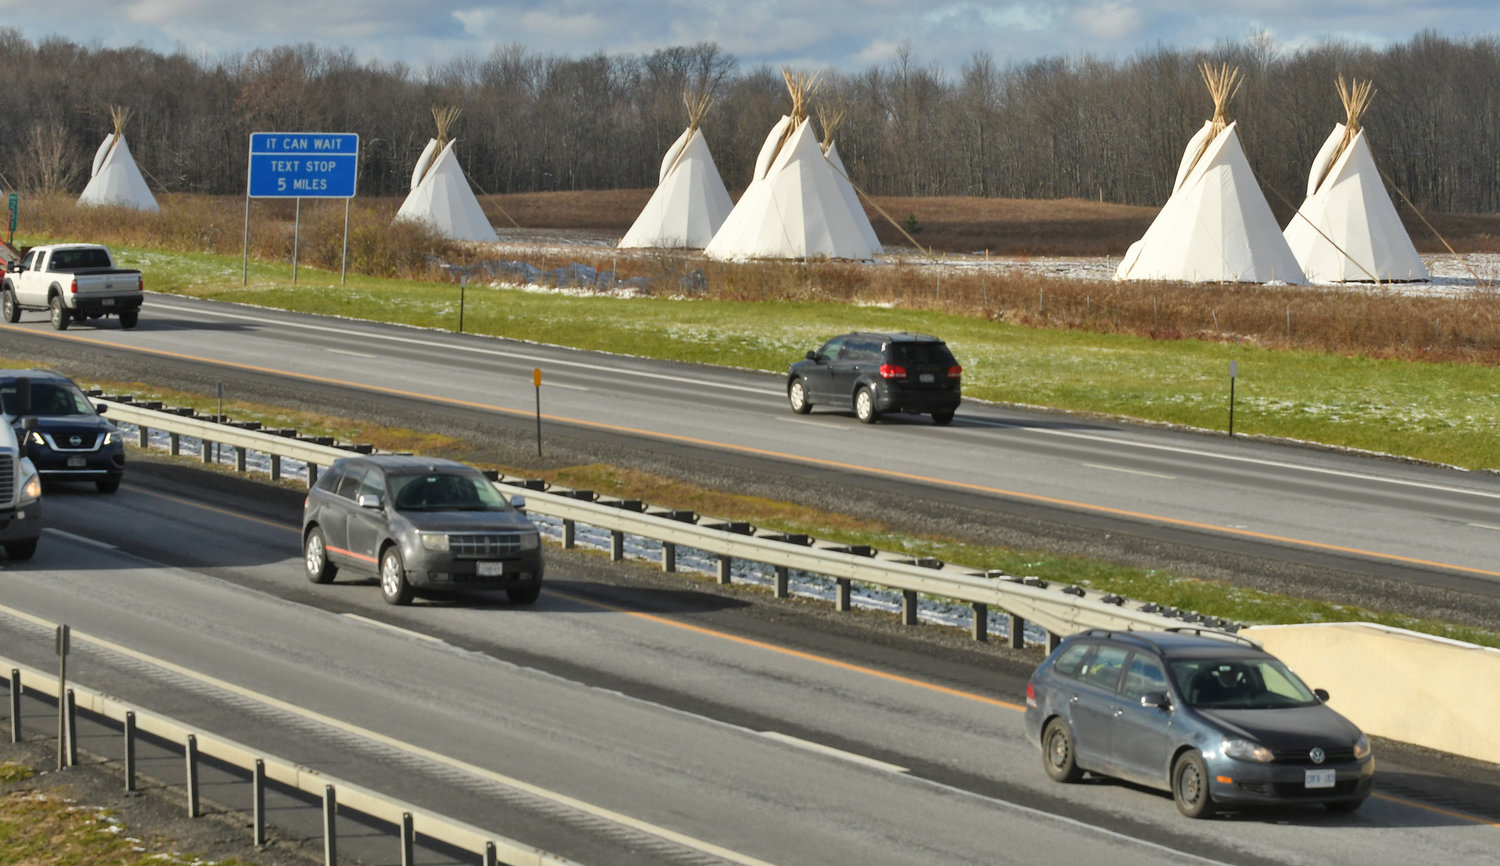 PASSAGE OF PEACE —  Comprising seven illuminated tipis located on Oneida Indian Nation lands just prior to Exit 33 of I-90, the Passage of Peace will run through the holidays. The Oneida Indian Nation chose the tipi as the Passage of Peace’s central image to recognize both these Western Tribal Nations and the collective challenges of Native American people. While the Oneidas and other Iroquois tribes lived in longhouses not tipis, the tipi is a universally recognized symbol of Native American identity. Lively east and westbound traffic on the NY State Thruway with the giant tipis on the north side of the through before the westbound Verona exit.